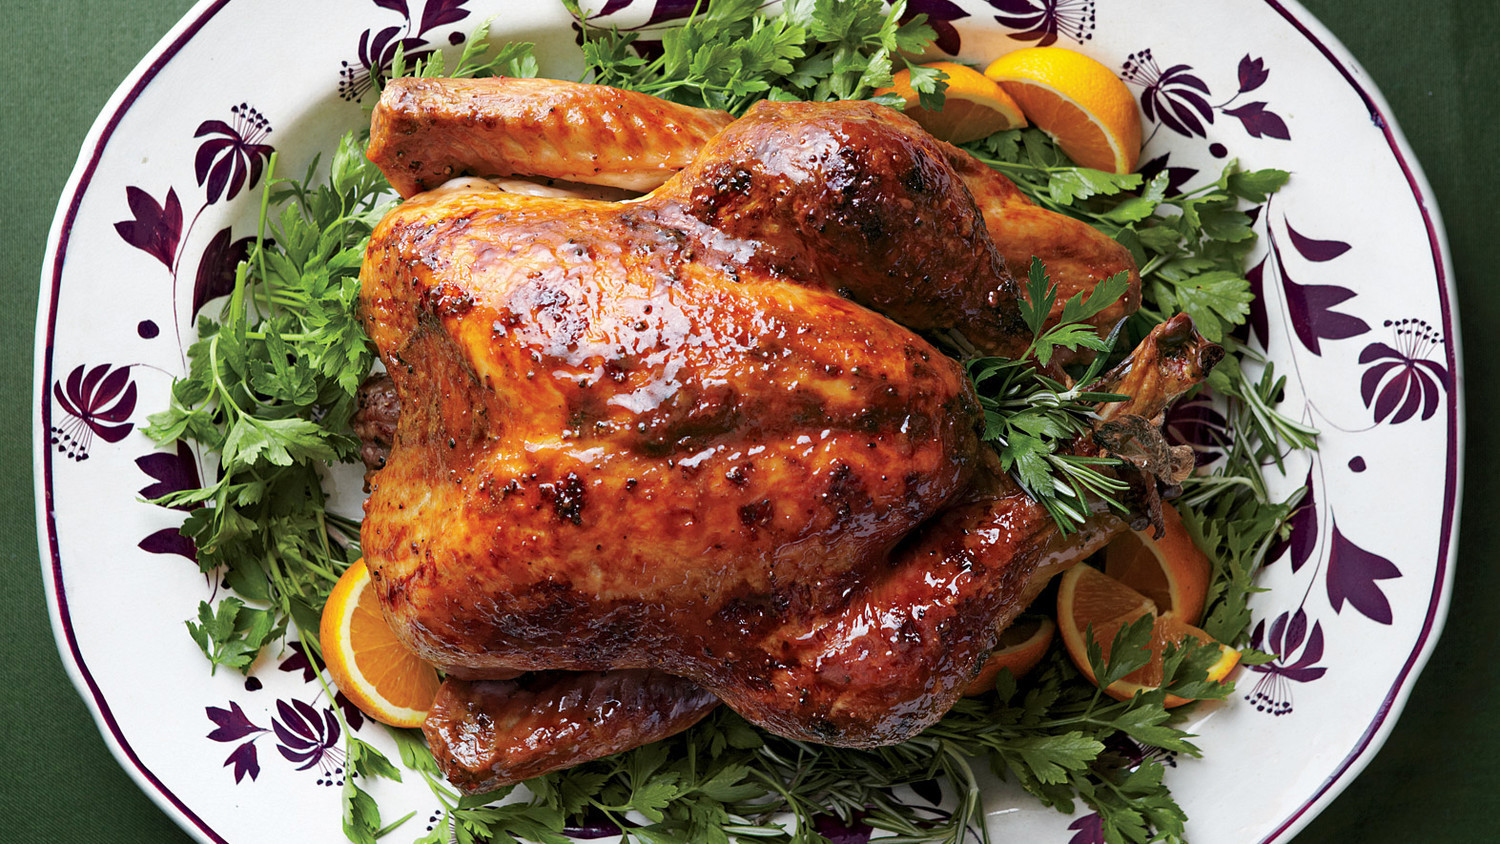 Turkey Images For Thanksgiving
 Turkey with Brown Sugar Glaze Recipe & Video